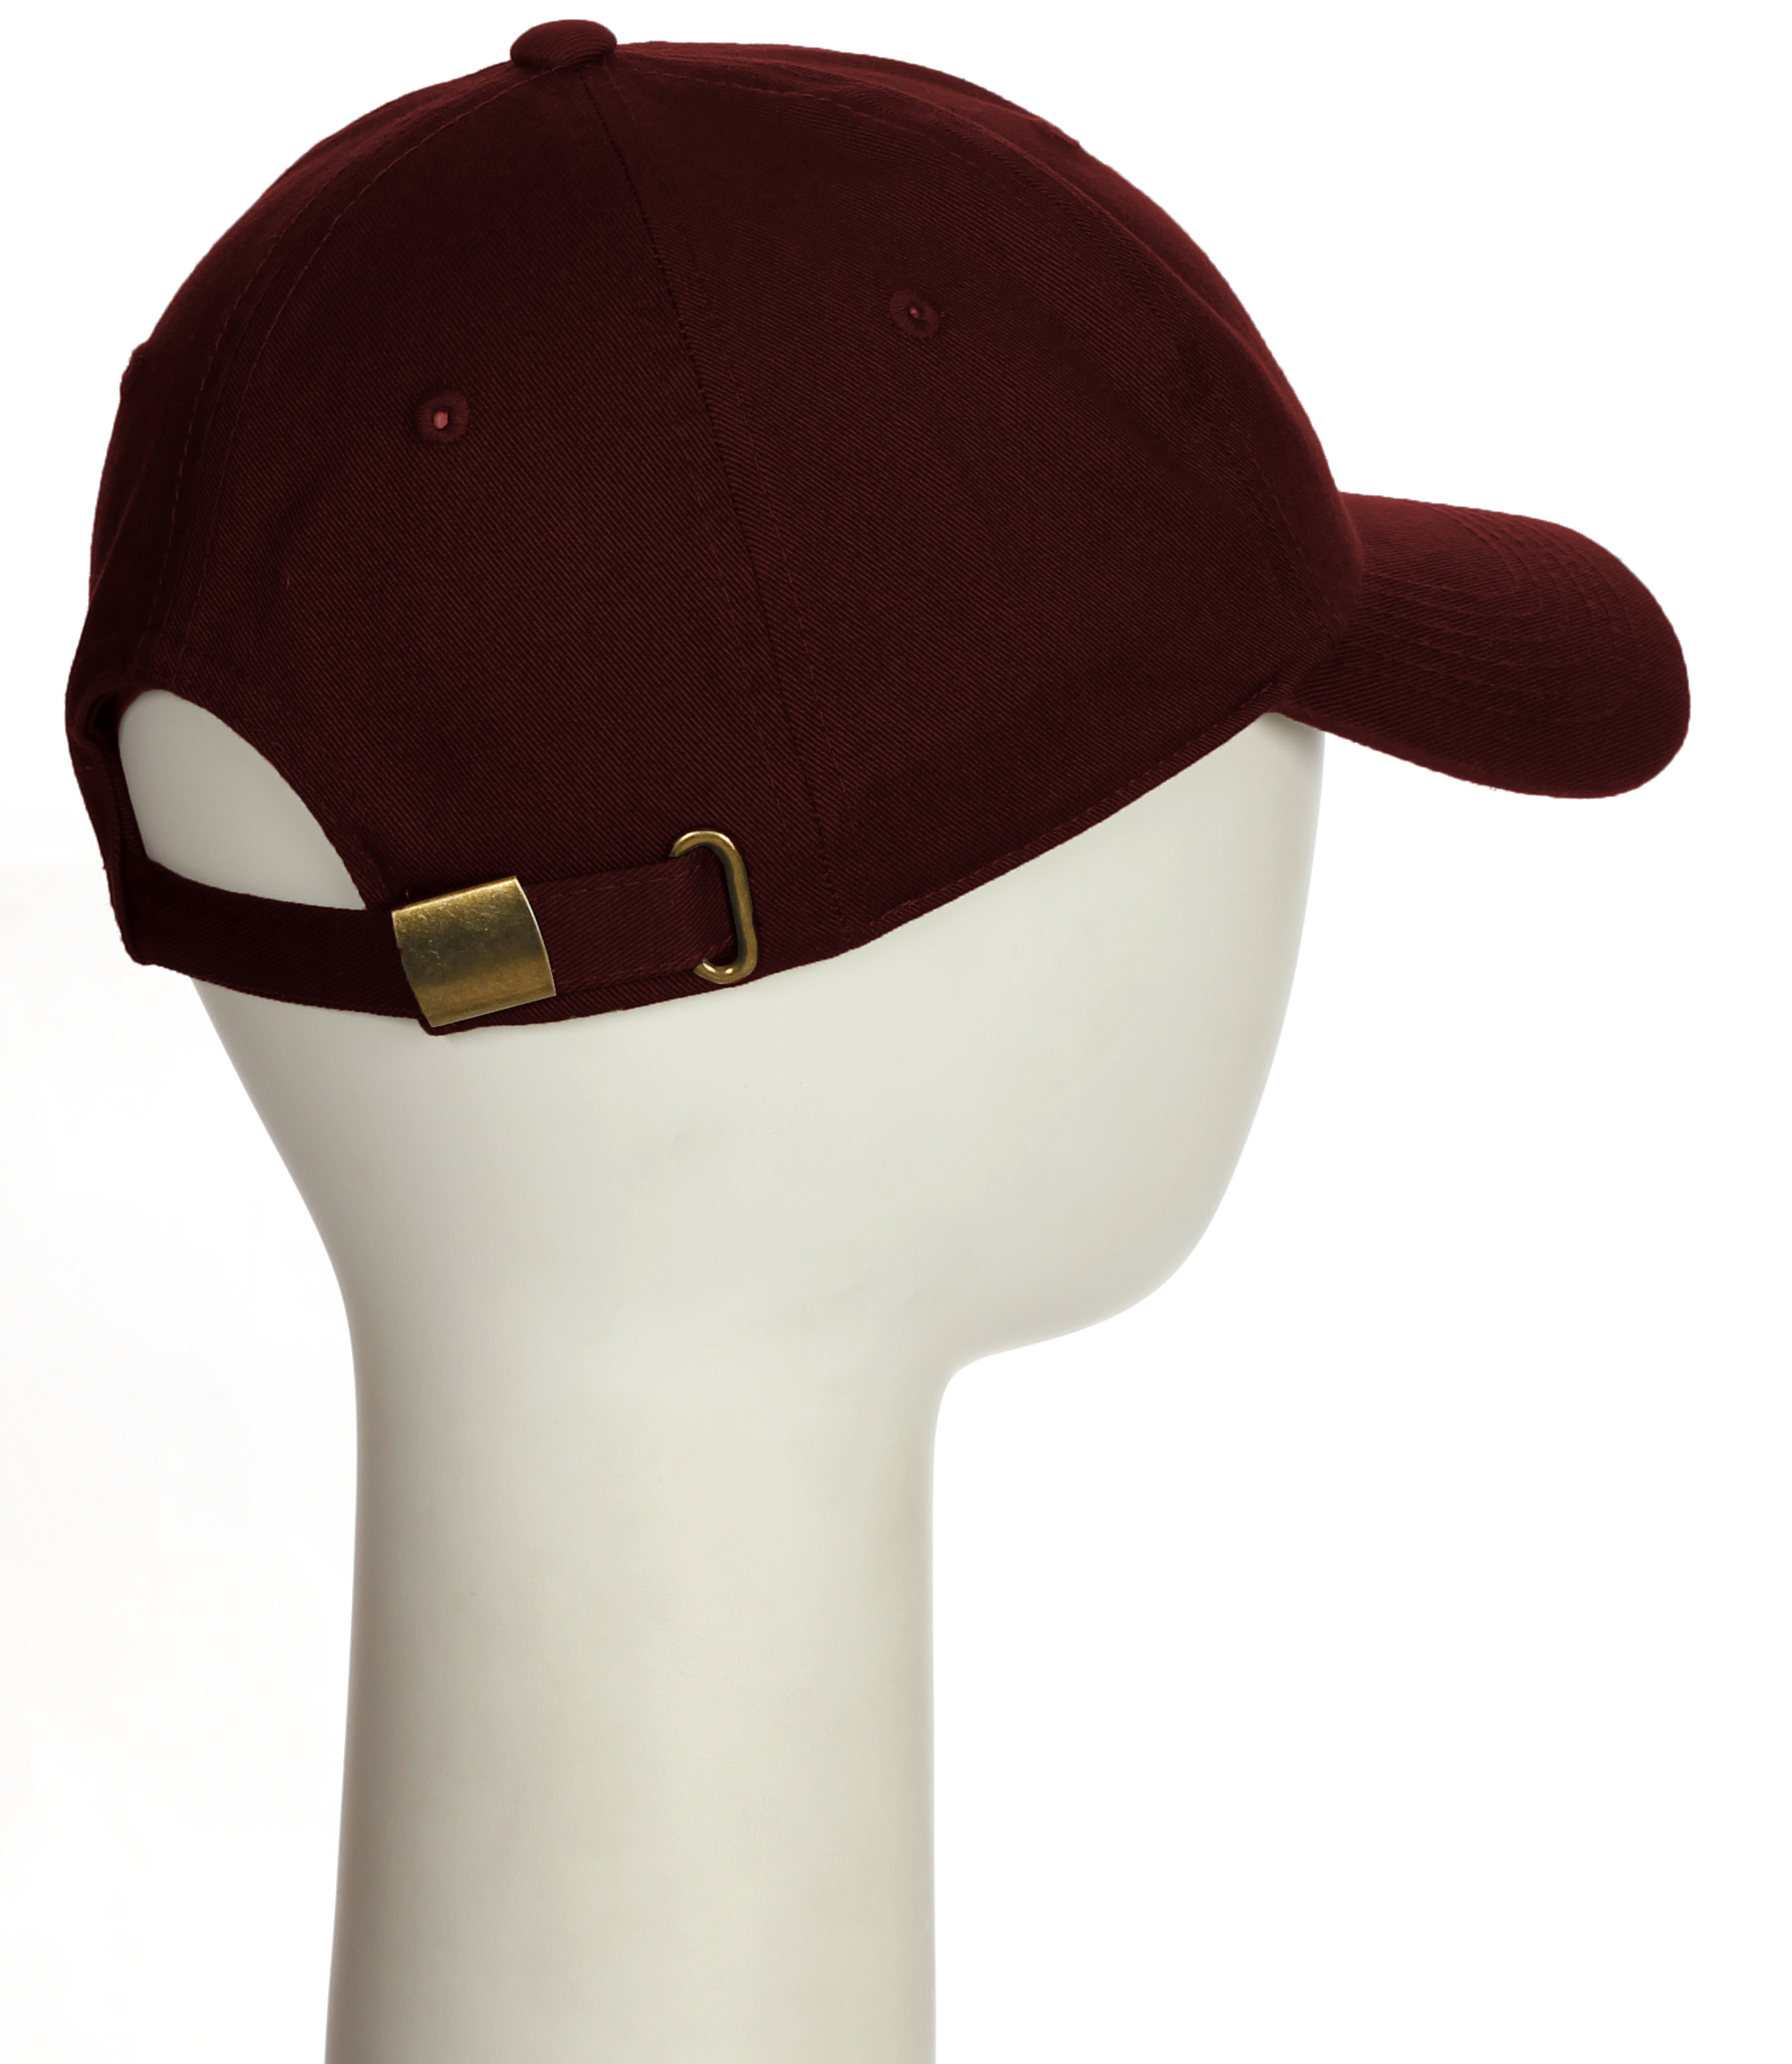 Custom Hat A to Z Initial Letters Classic Baseball Cap, Burgundy Hat White Navy Letter H - image 3 of 4